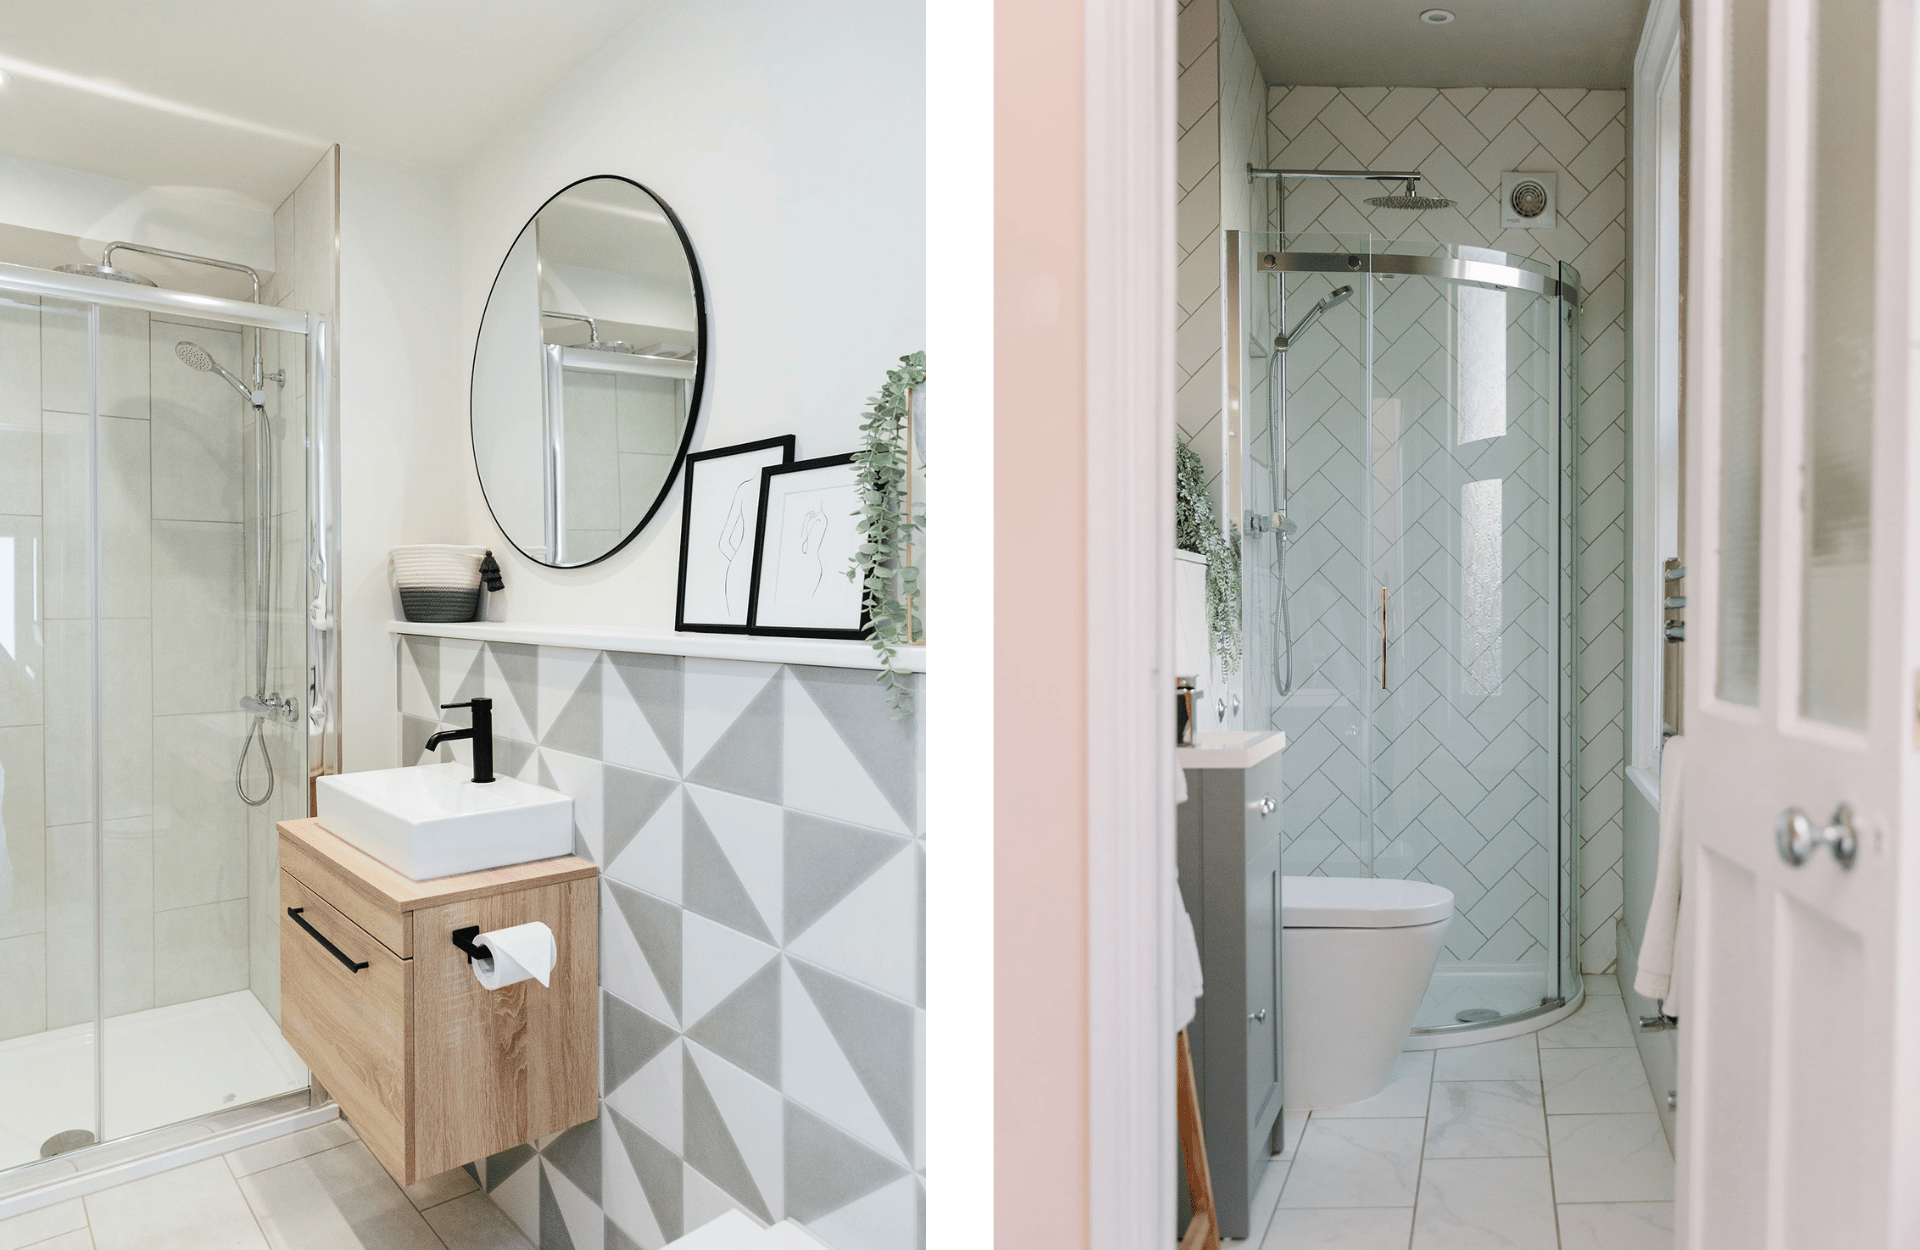 Layouts for small bathrooms